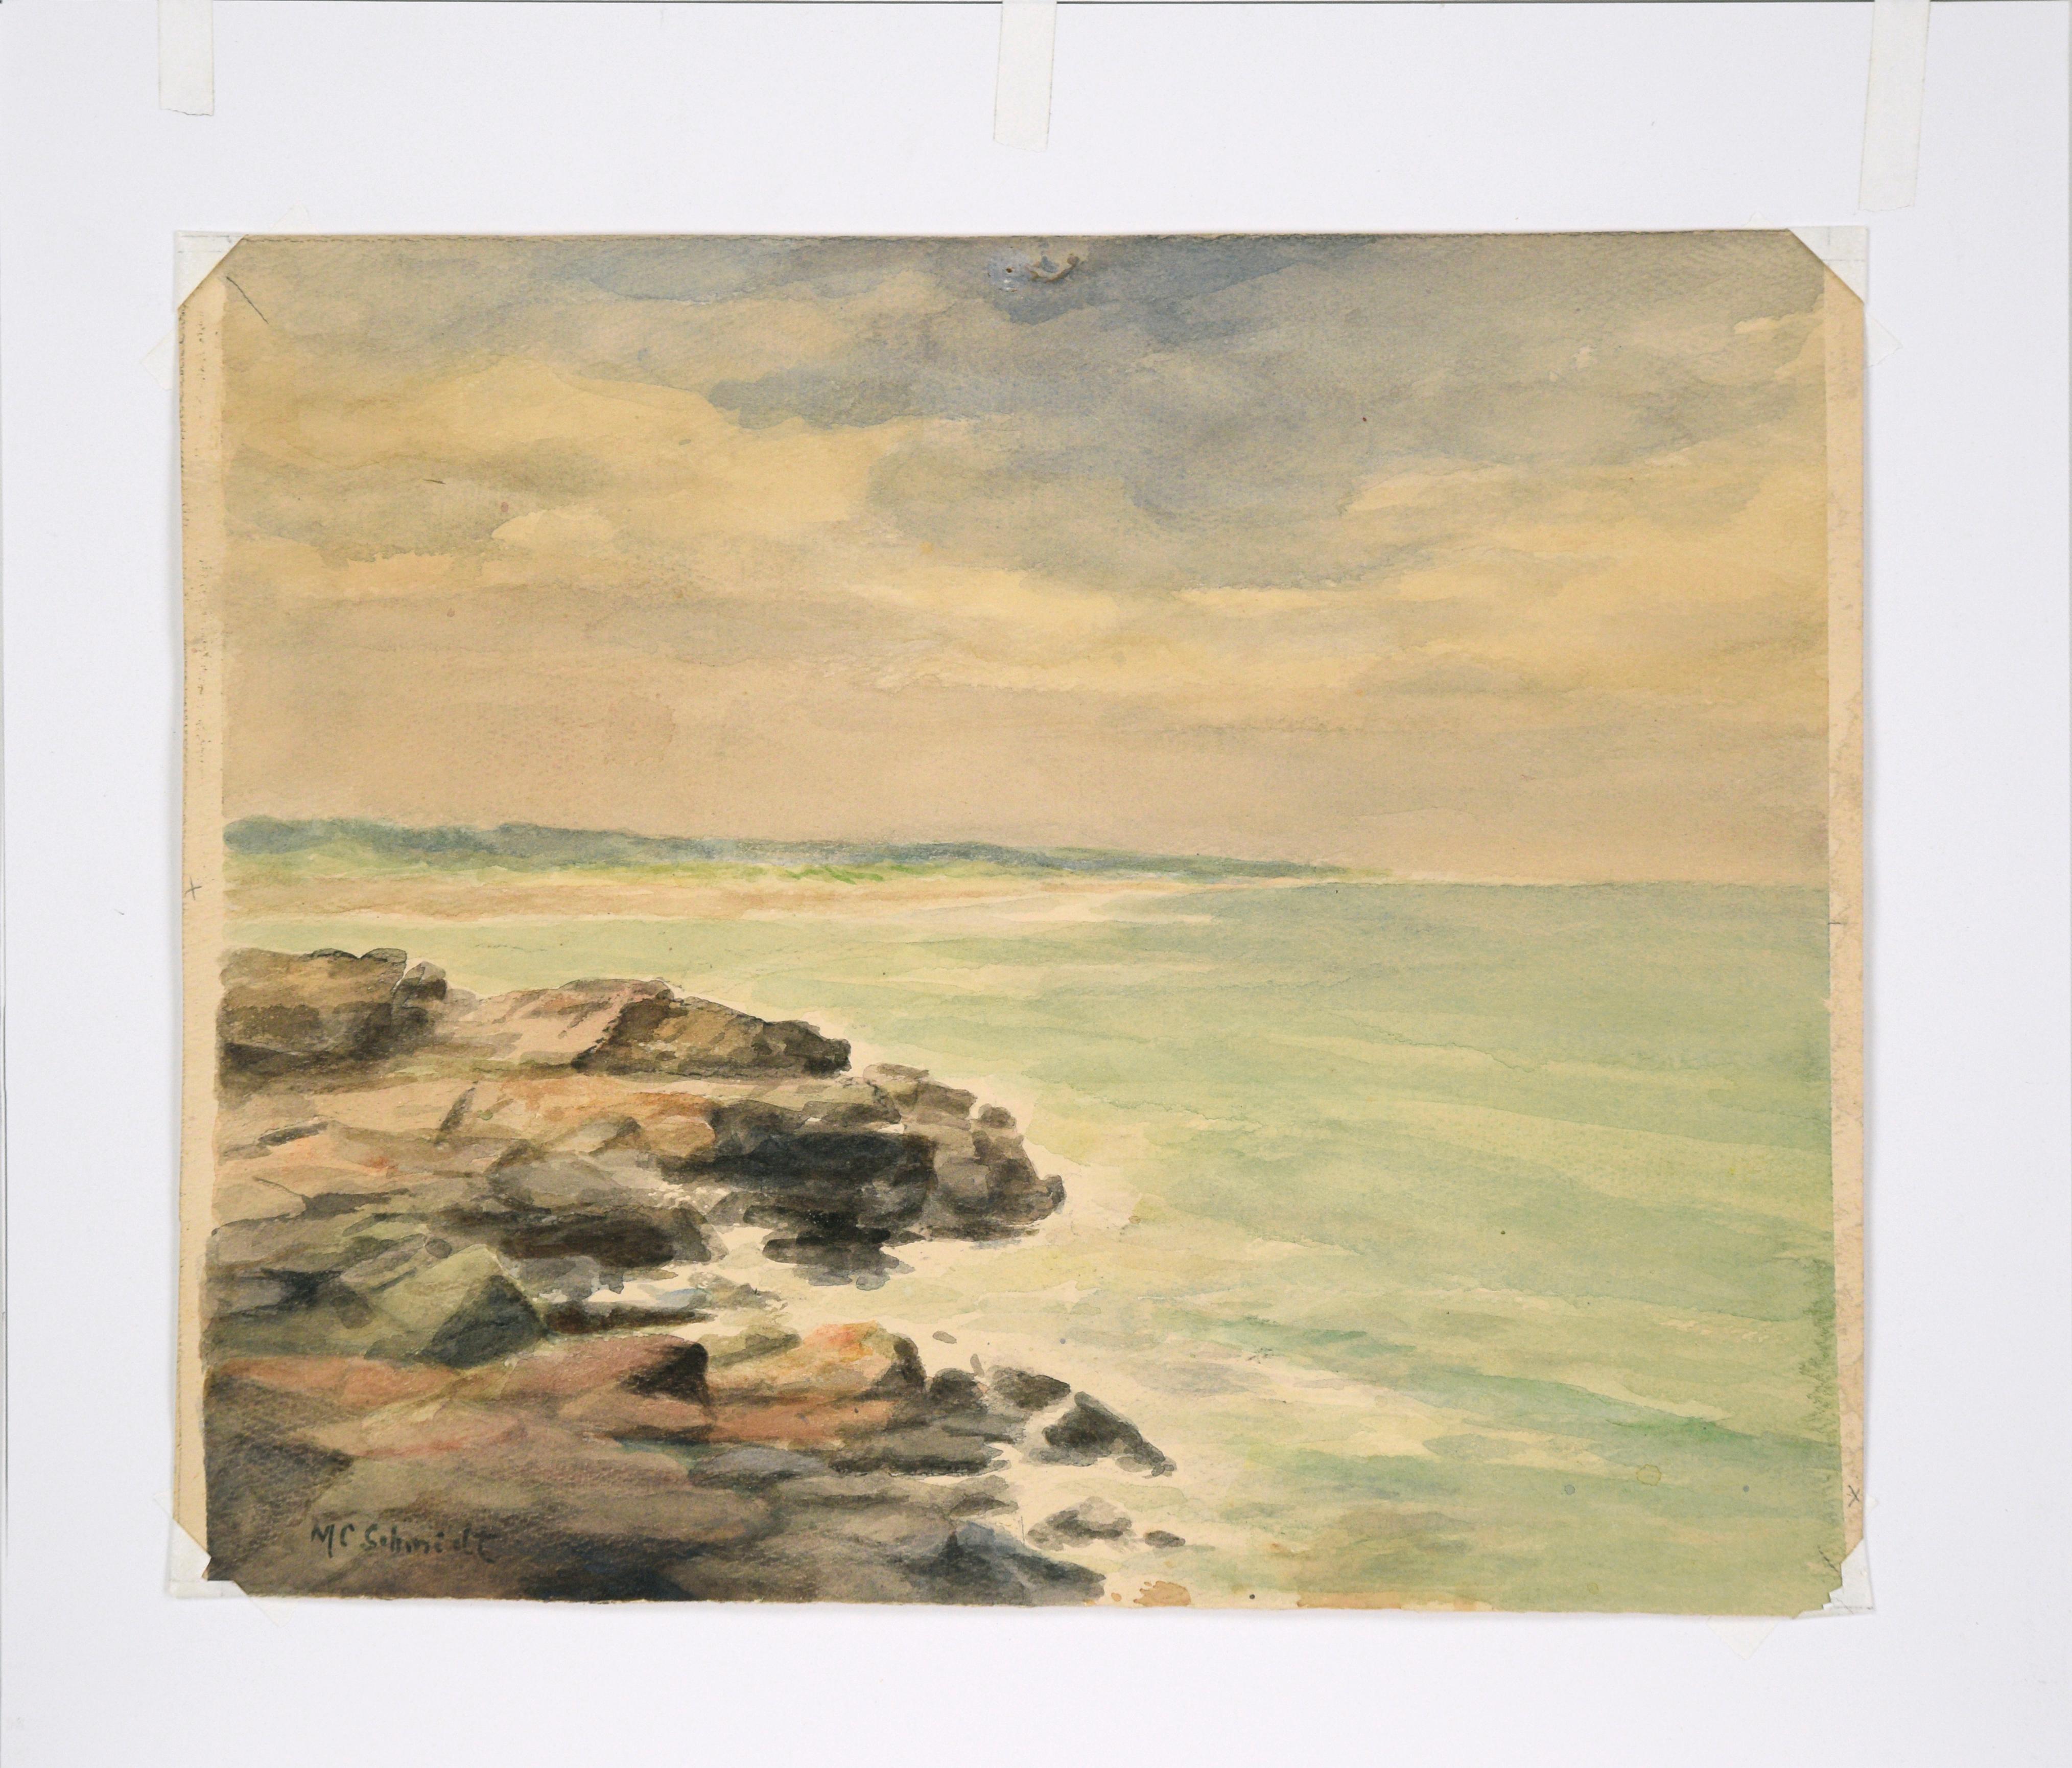 Serene mid century watercolor seascape signed by unknown artist M. C. Schmidt. Signed in the lower left corner. Presented in a new buff mat with foamcore backing. Paper size: 11.88